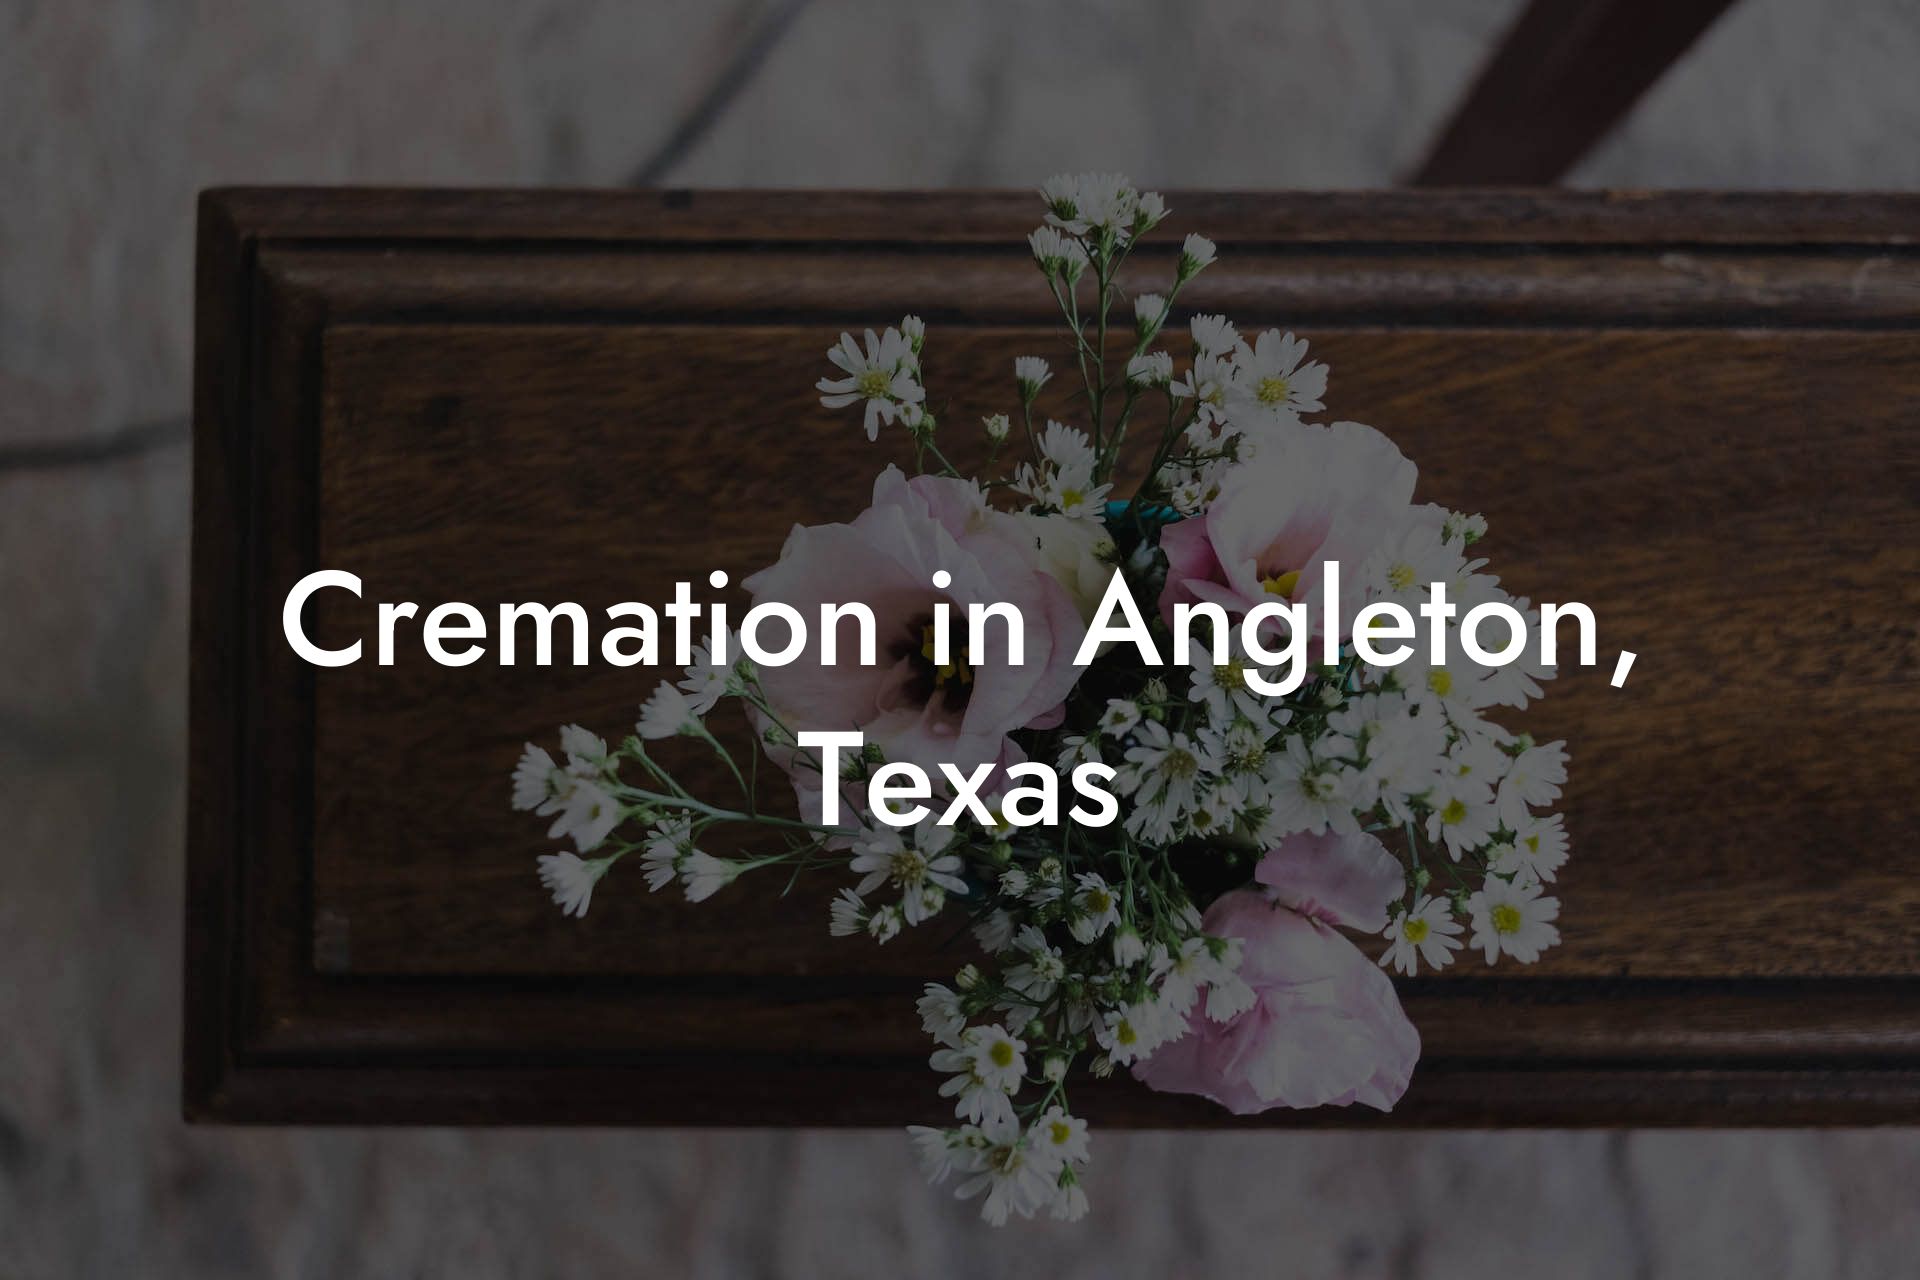 Cremation in Angleton, Texas